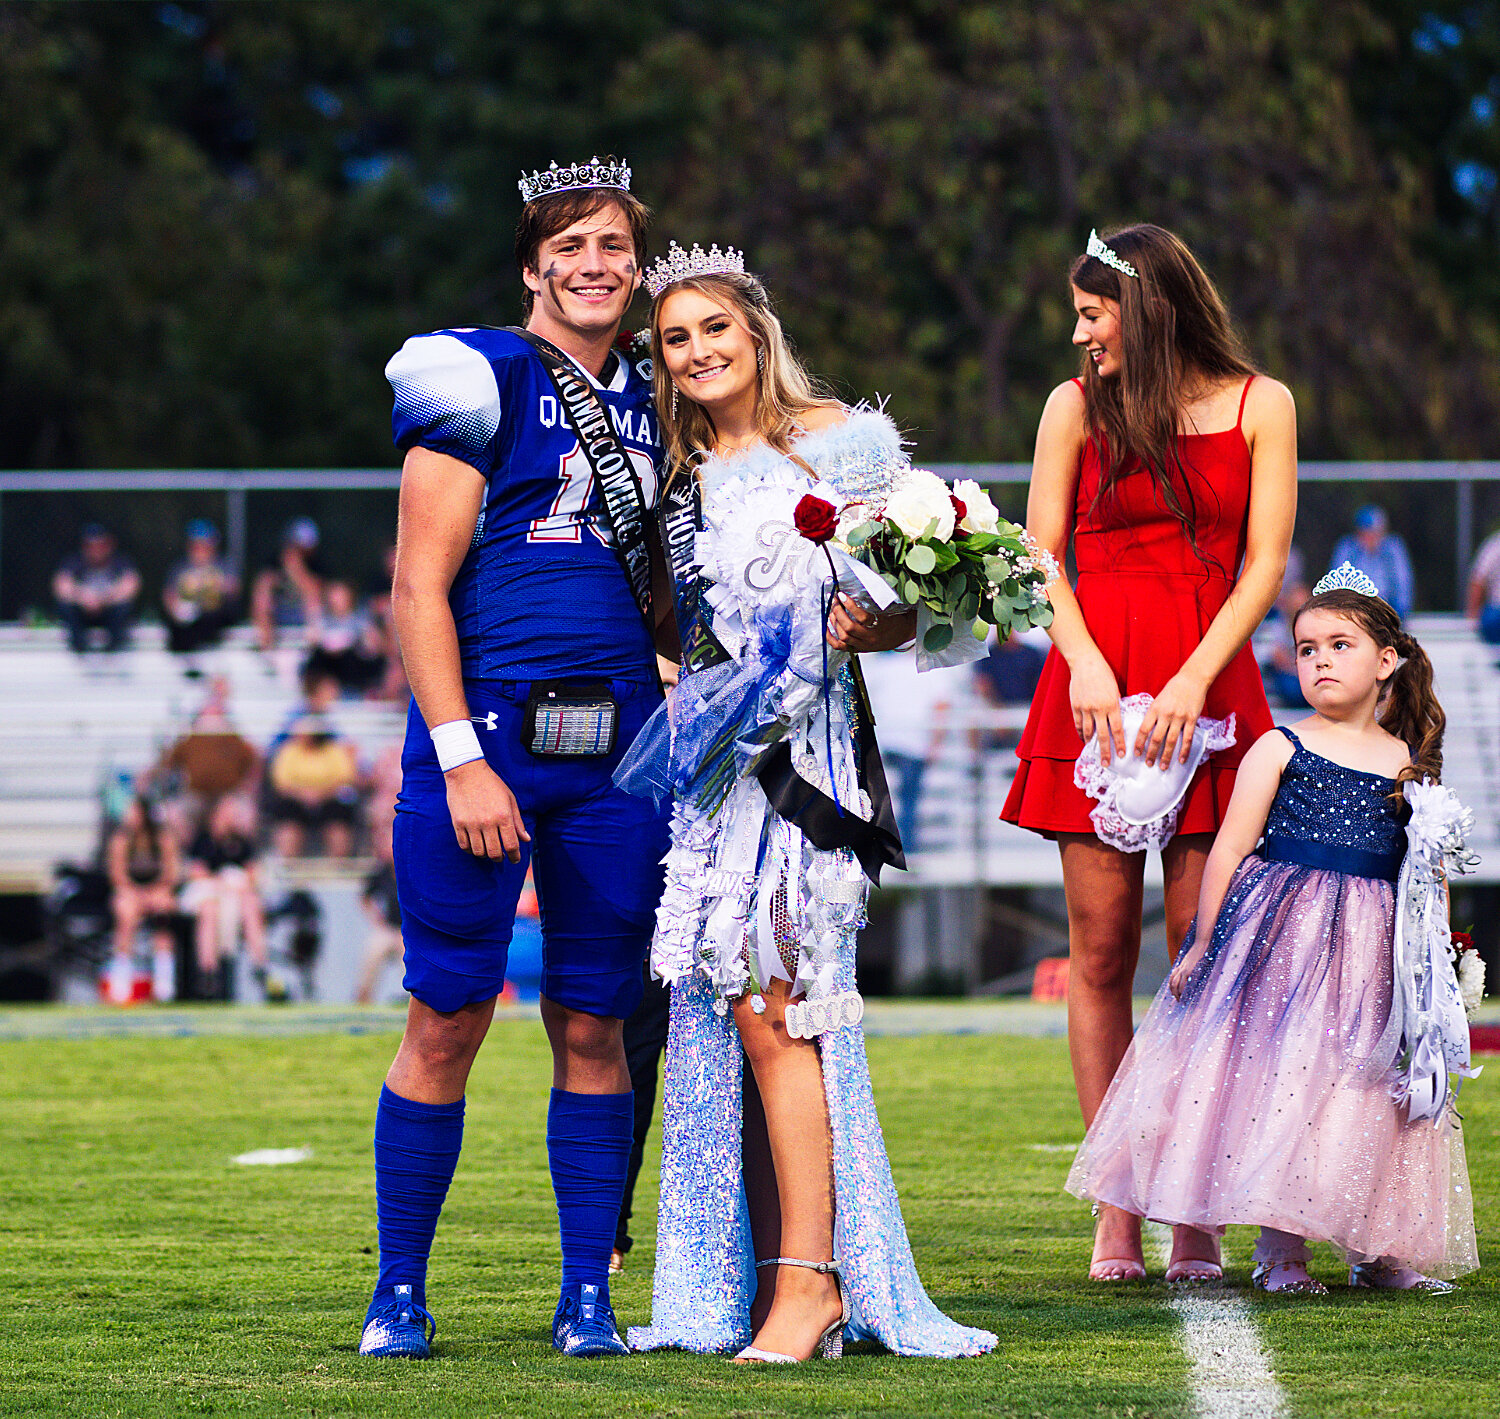 Newly-crowned 2023 Quitman homecoming king and queen Mikey Pickering and Hannah Holland after being crowned by the previous queen, Kameran Farnham, and attendant Sawyer Osbourn. [see more sights & buy Bulldogs prints]